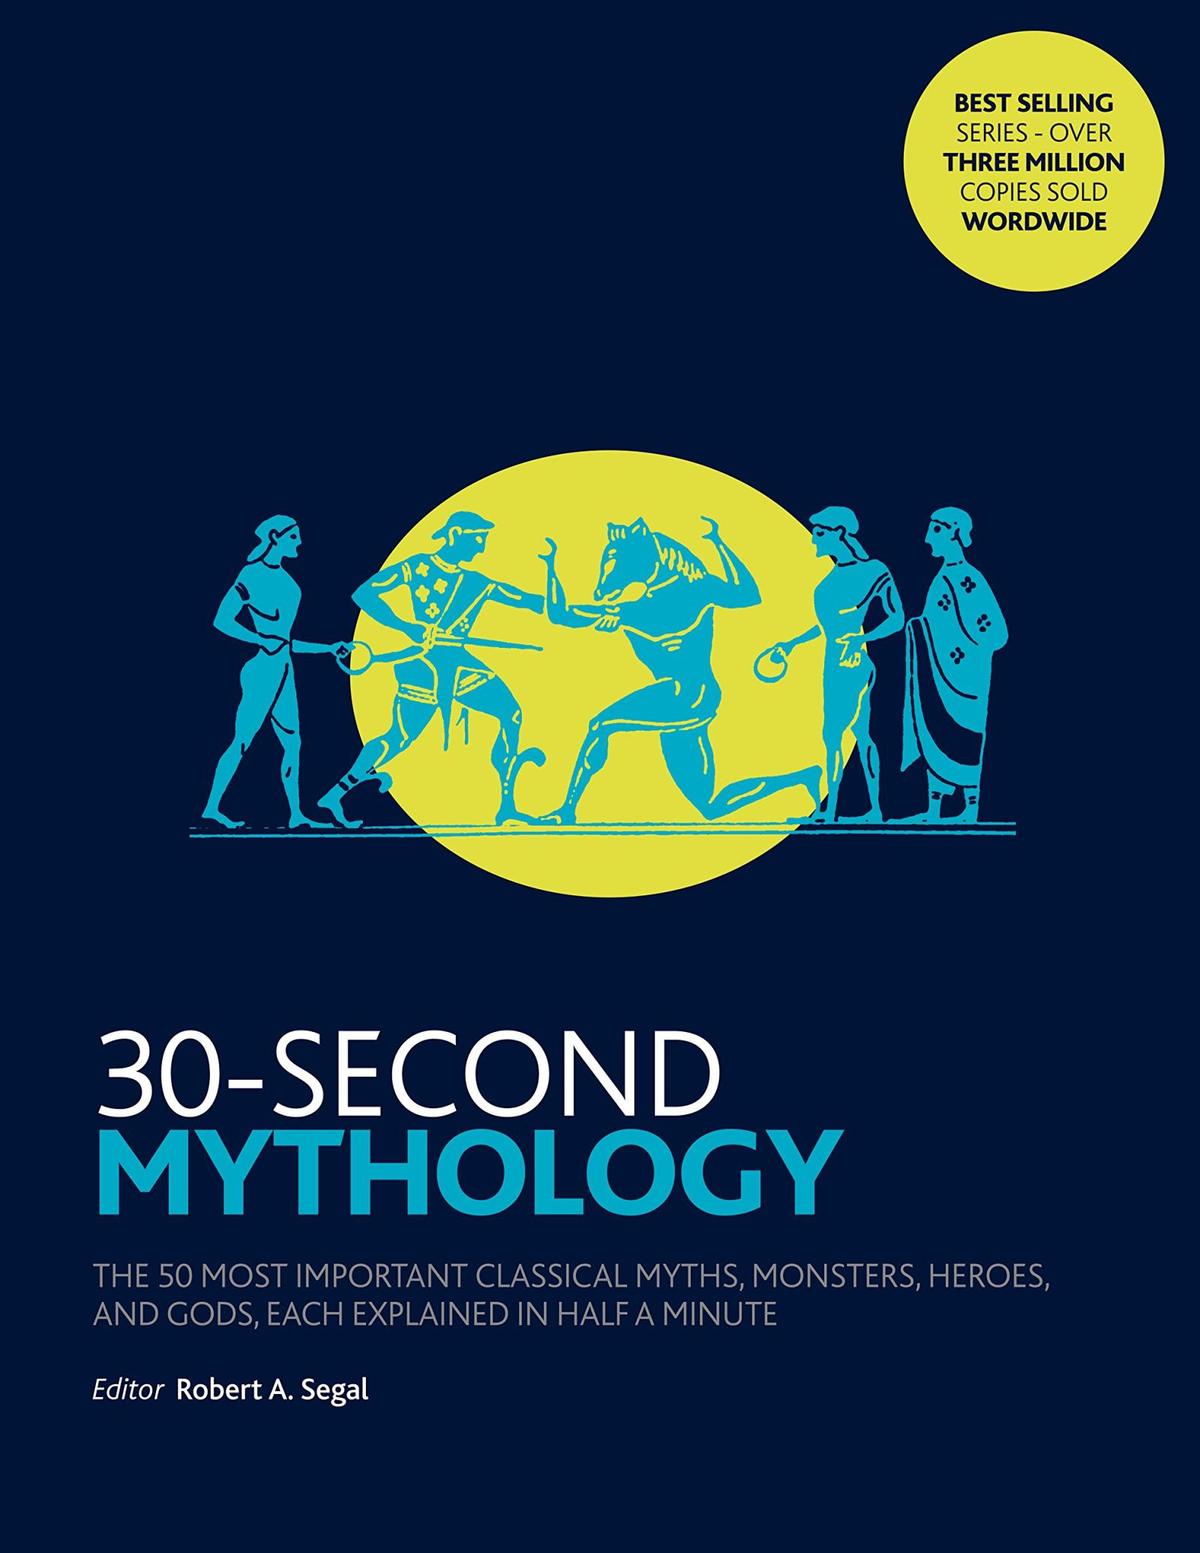 30-Second Mythology: The 50 most important classical gods and goddesses, heroes and monsters, myths and legacies, each explained in half a minute.